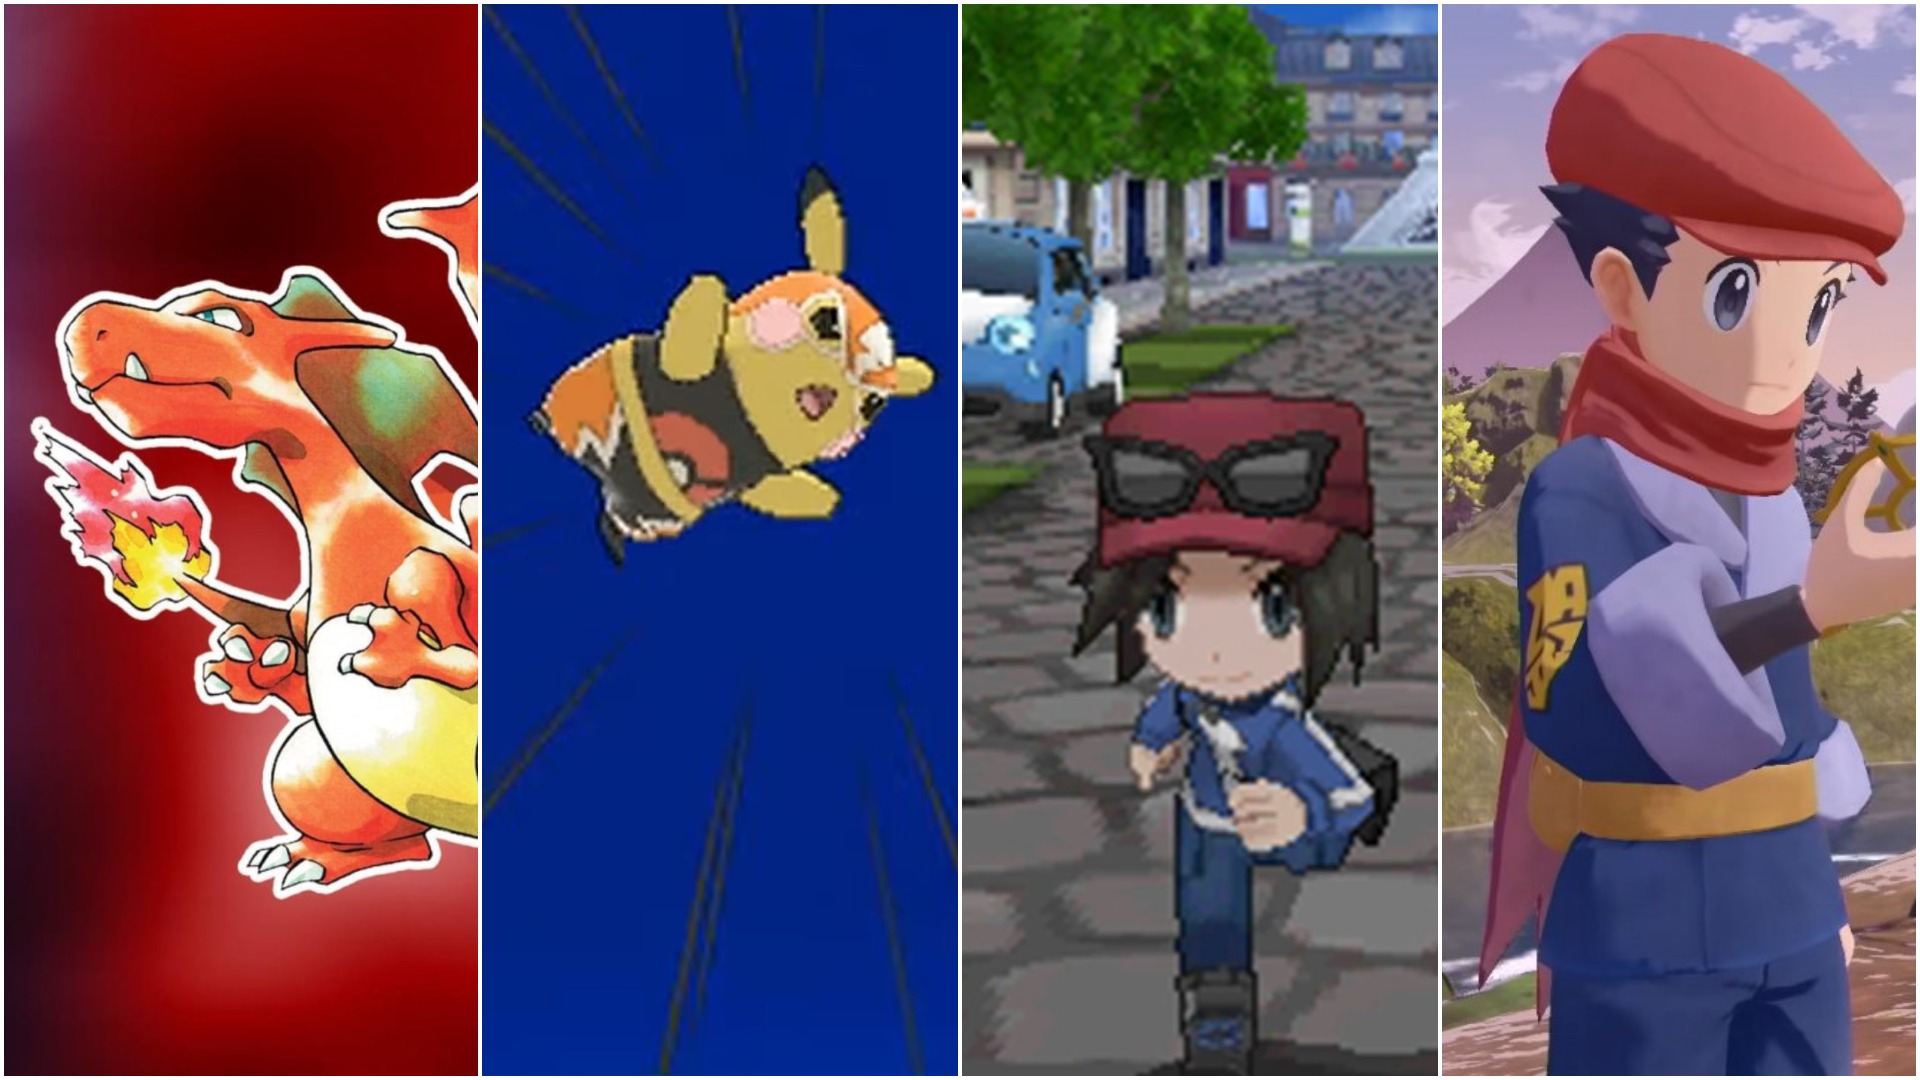 All Pokémon Games In The Correct Order